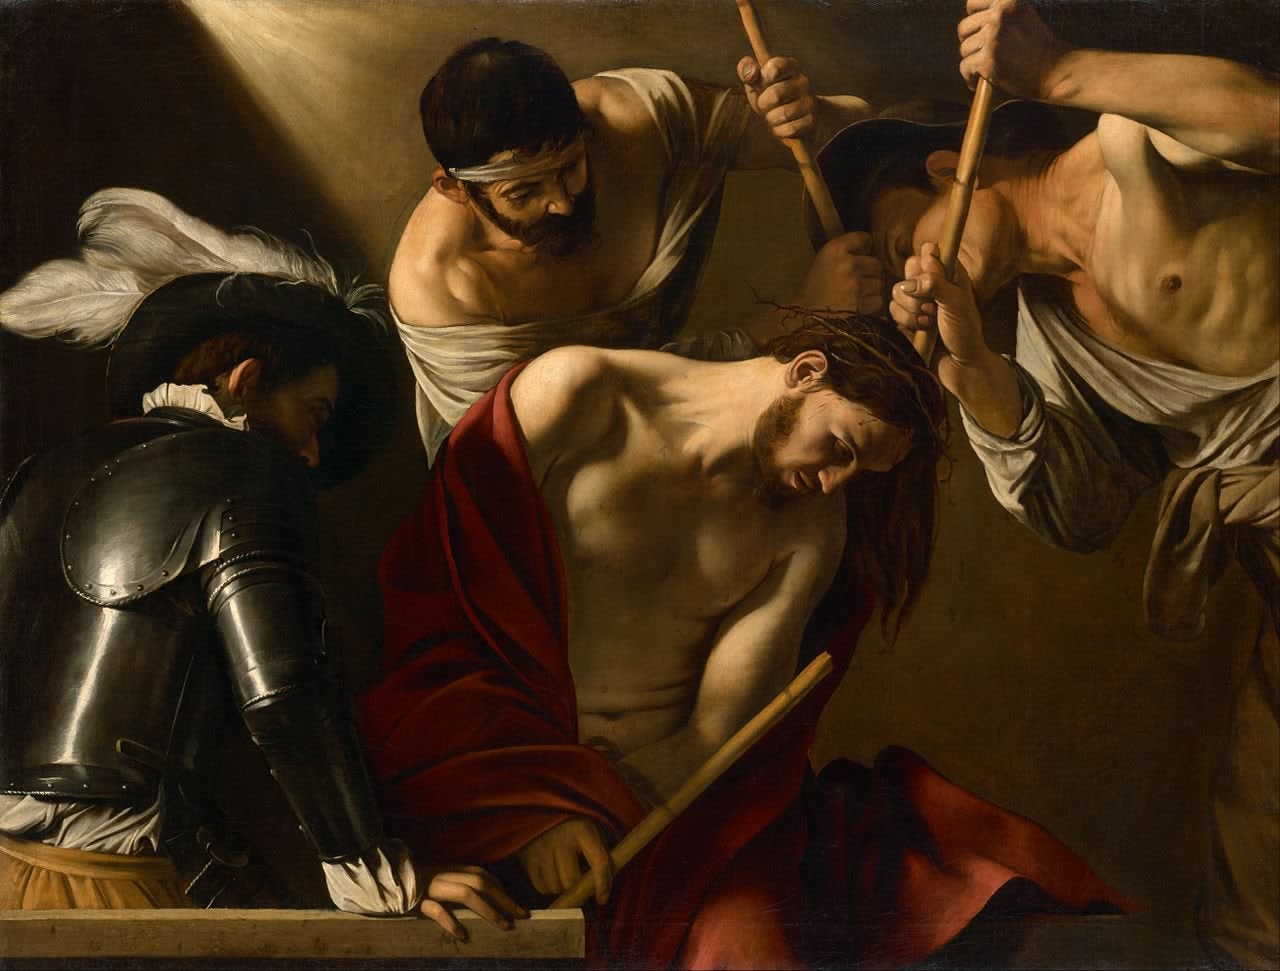 The Crowning with Thorns by Caravaggio, 1602-4